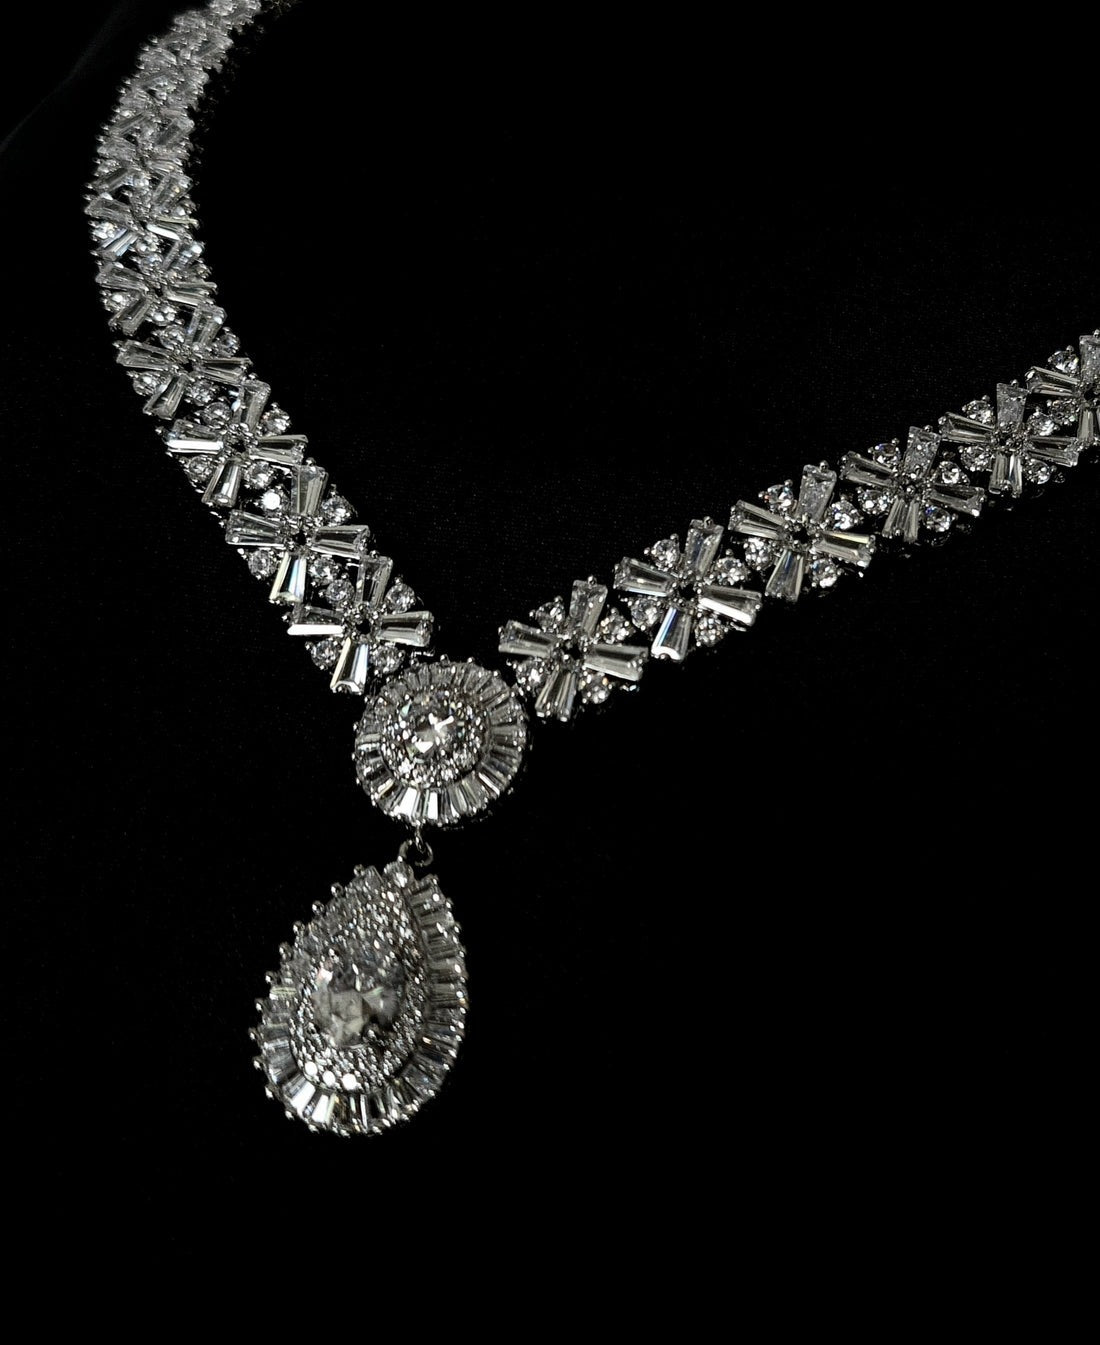 a necklace with a large diamond pendant on a black background. The pendant is round and has a white diamond in the center. The necklace is made of silver and has a big chain. The background is black.